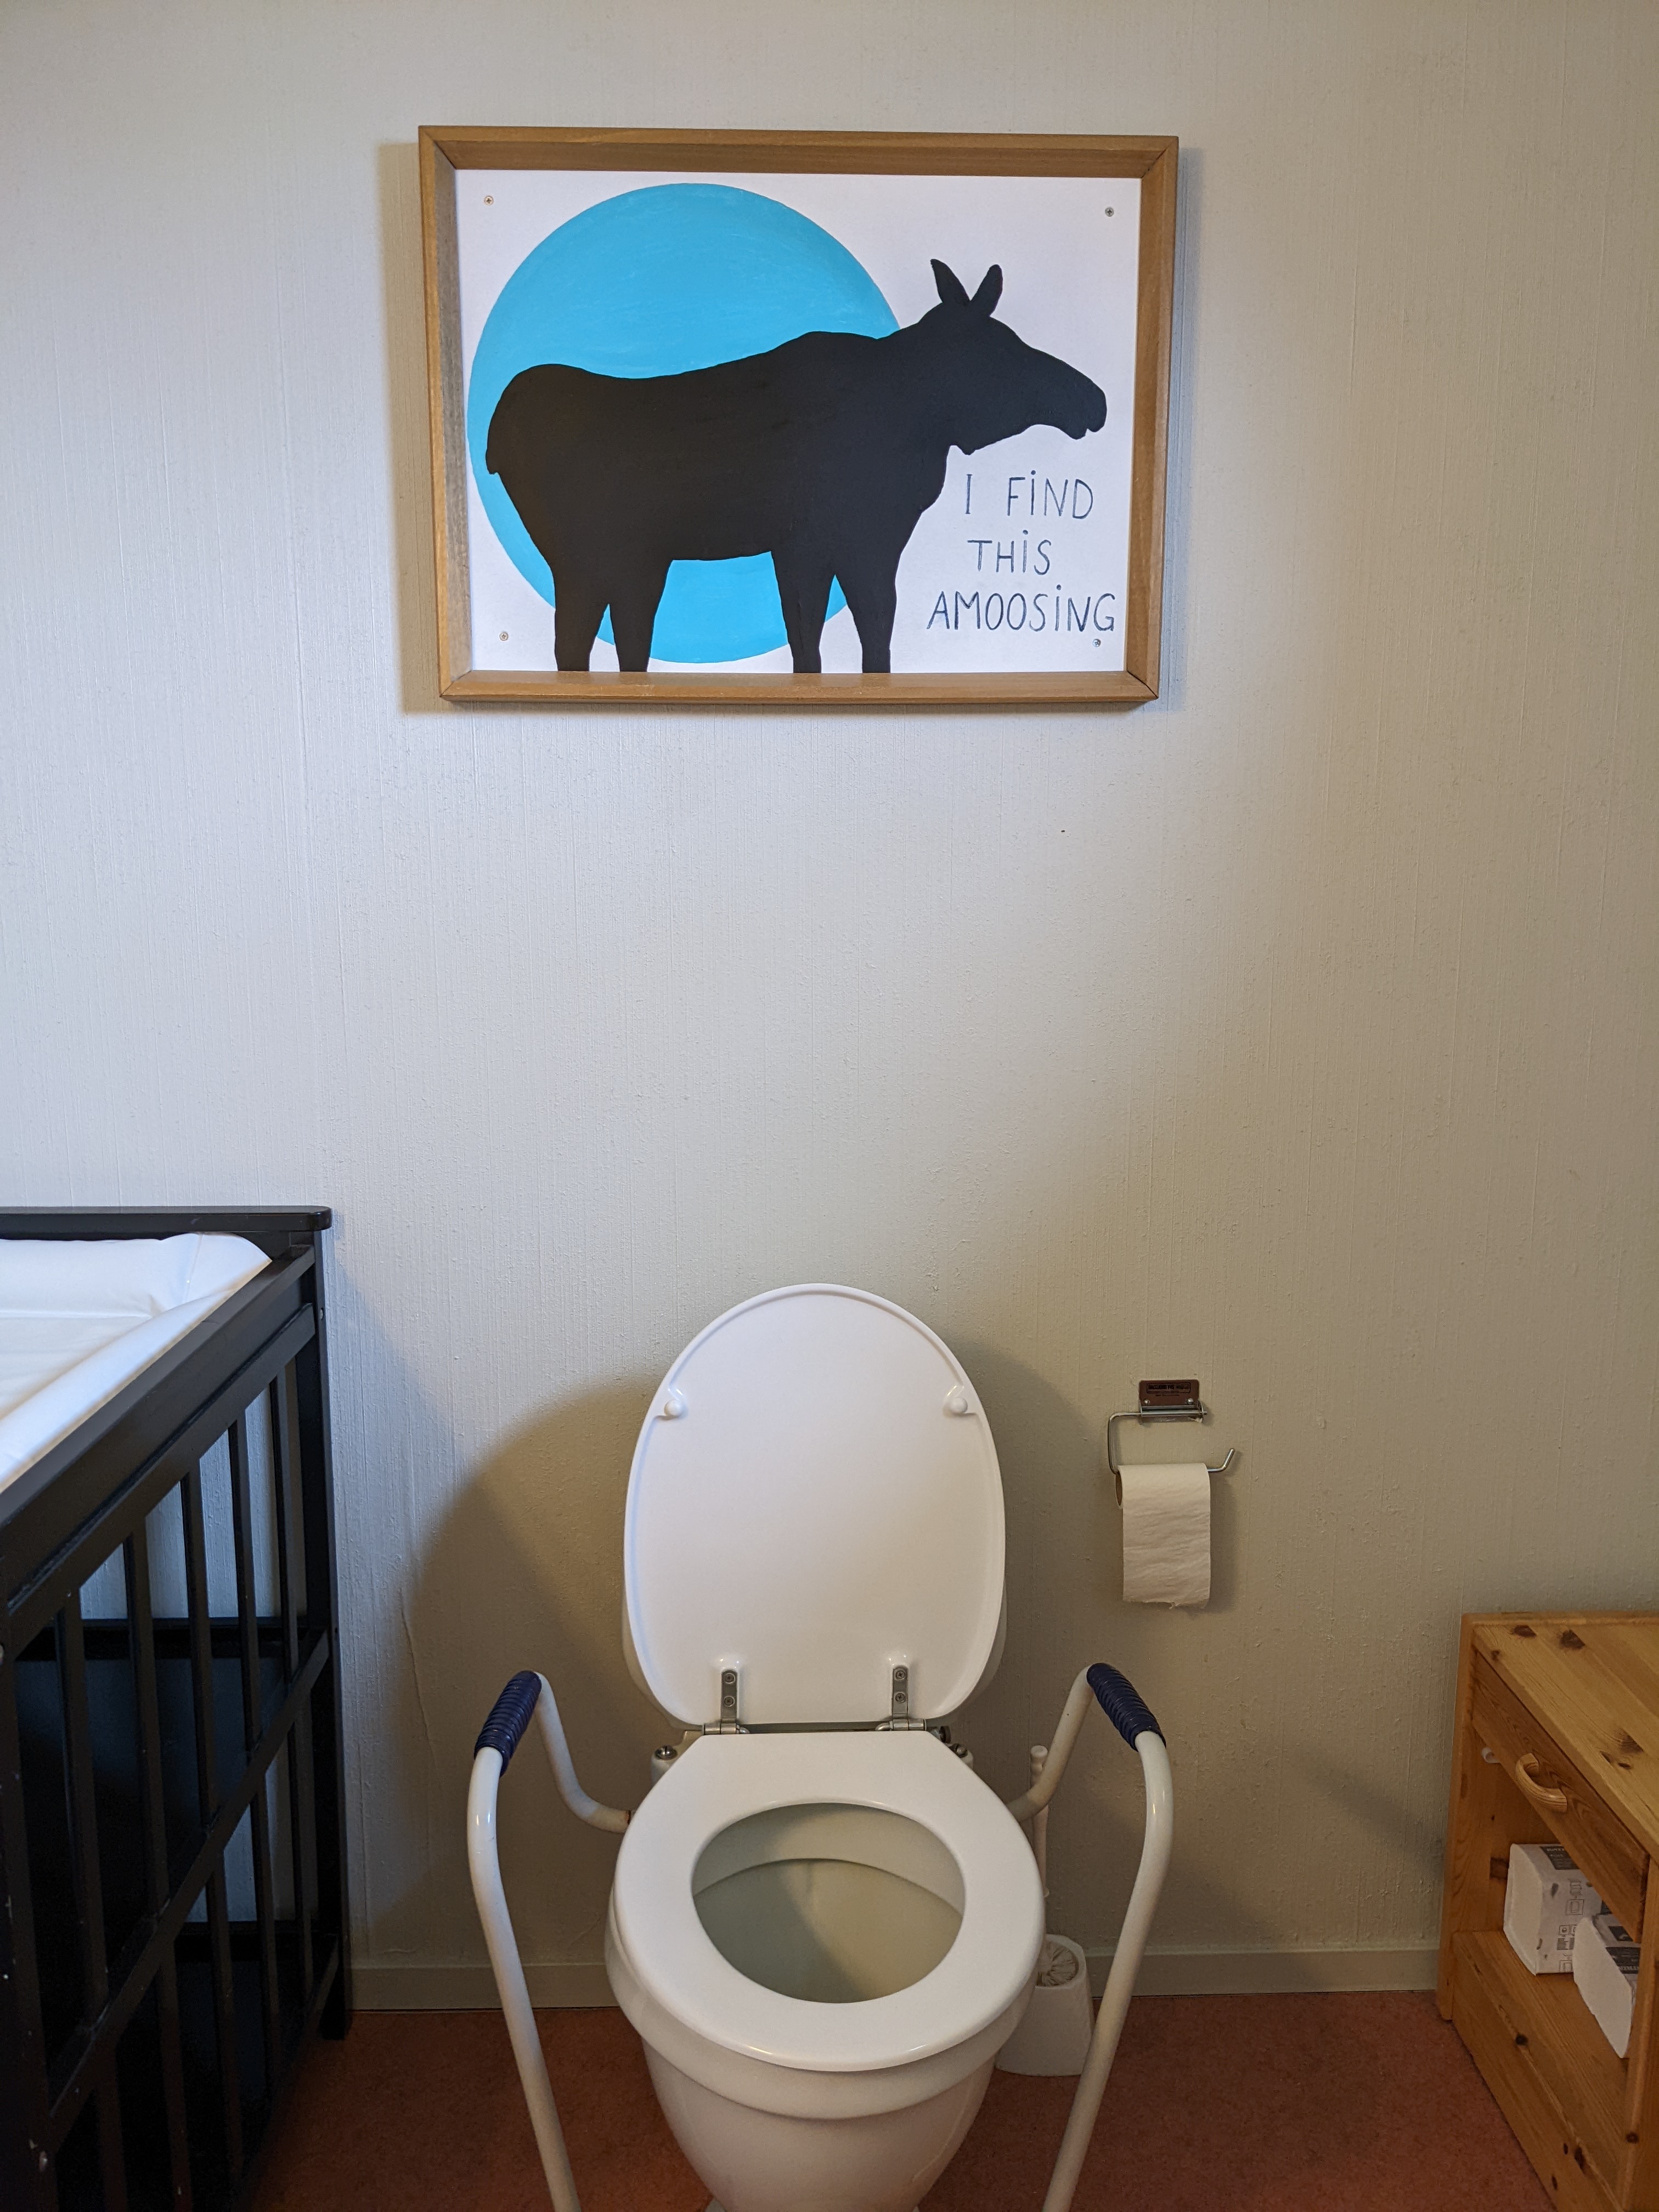 a graphic of a moose silhouette with the moon behind it next to the words "I find this amoosing" hanging above a toilet